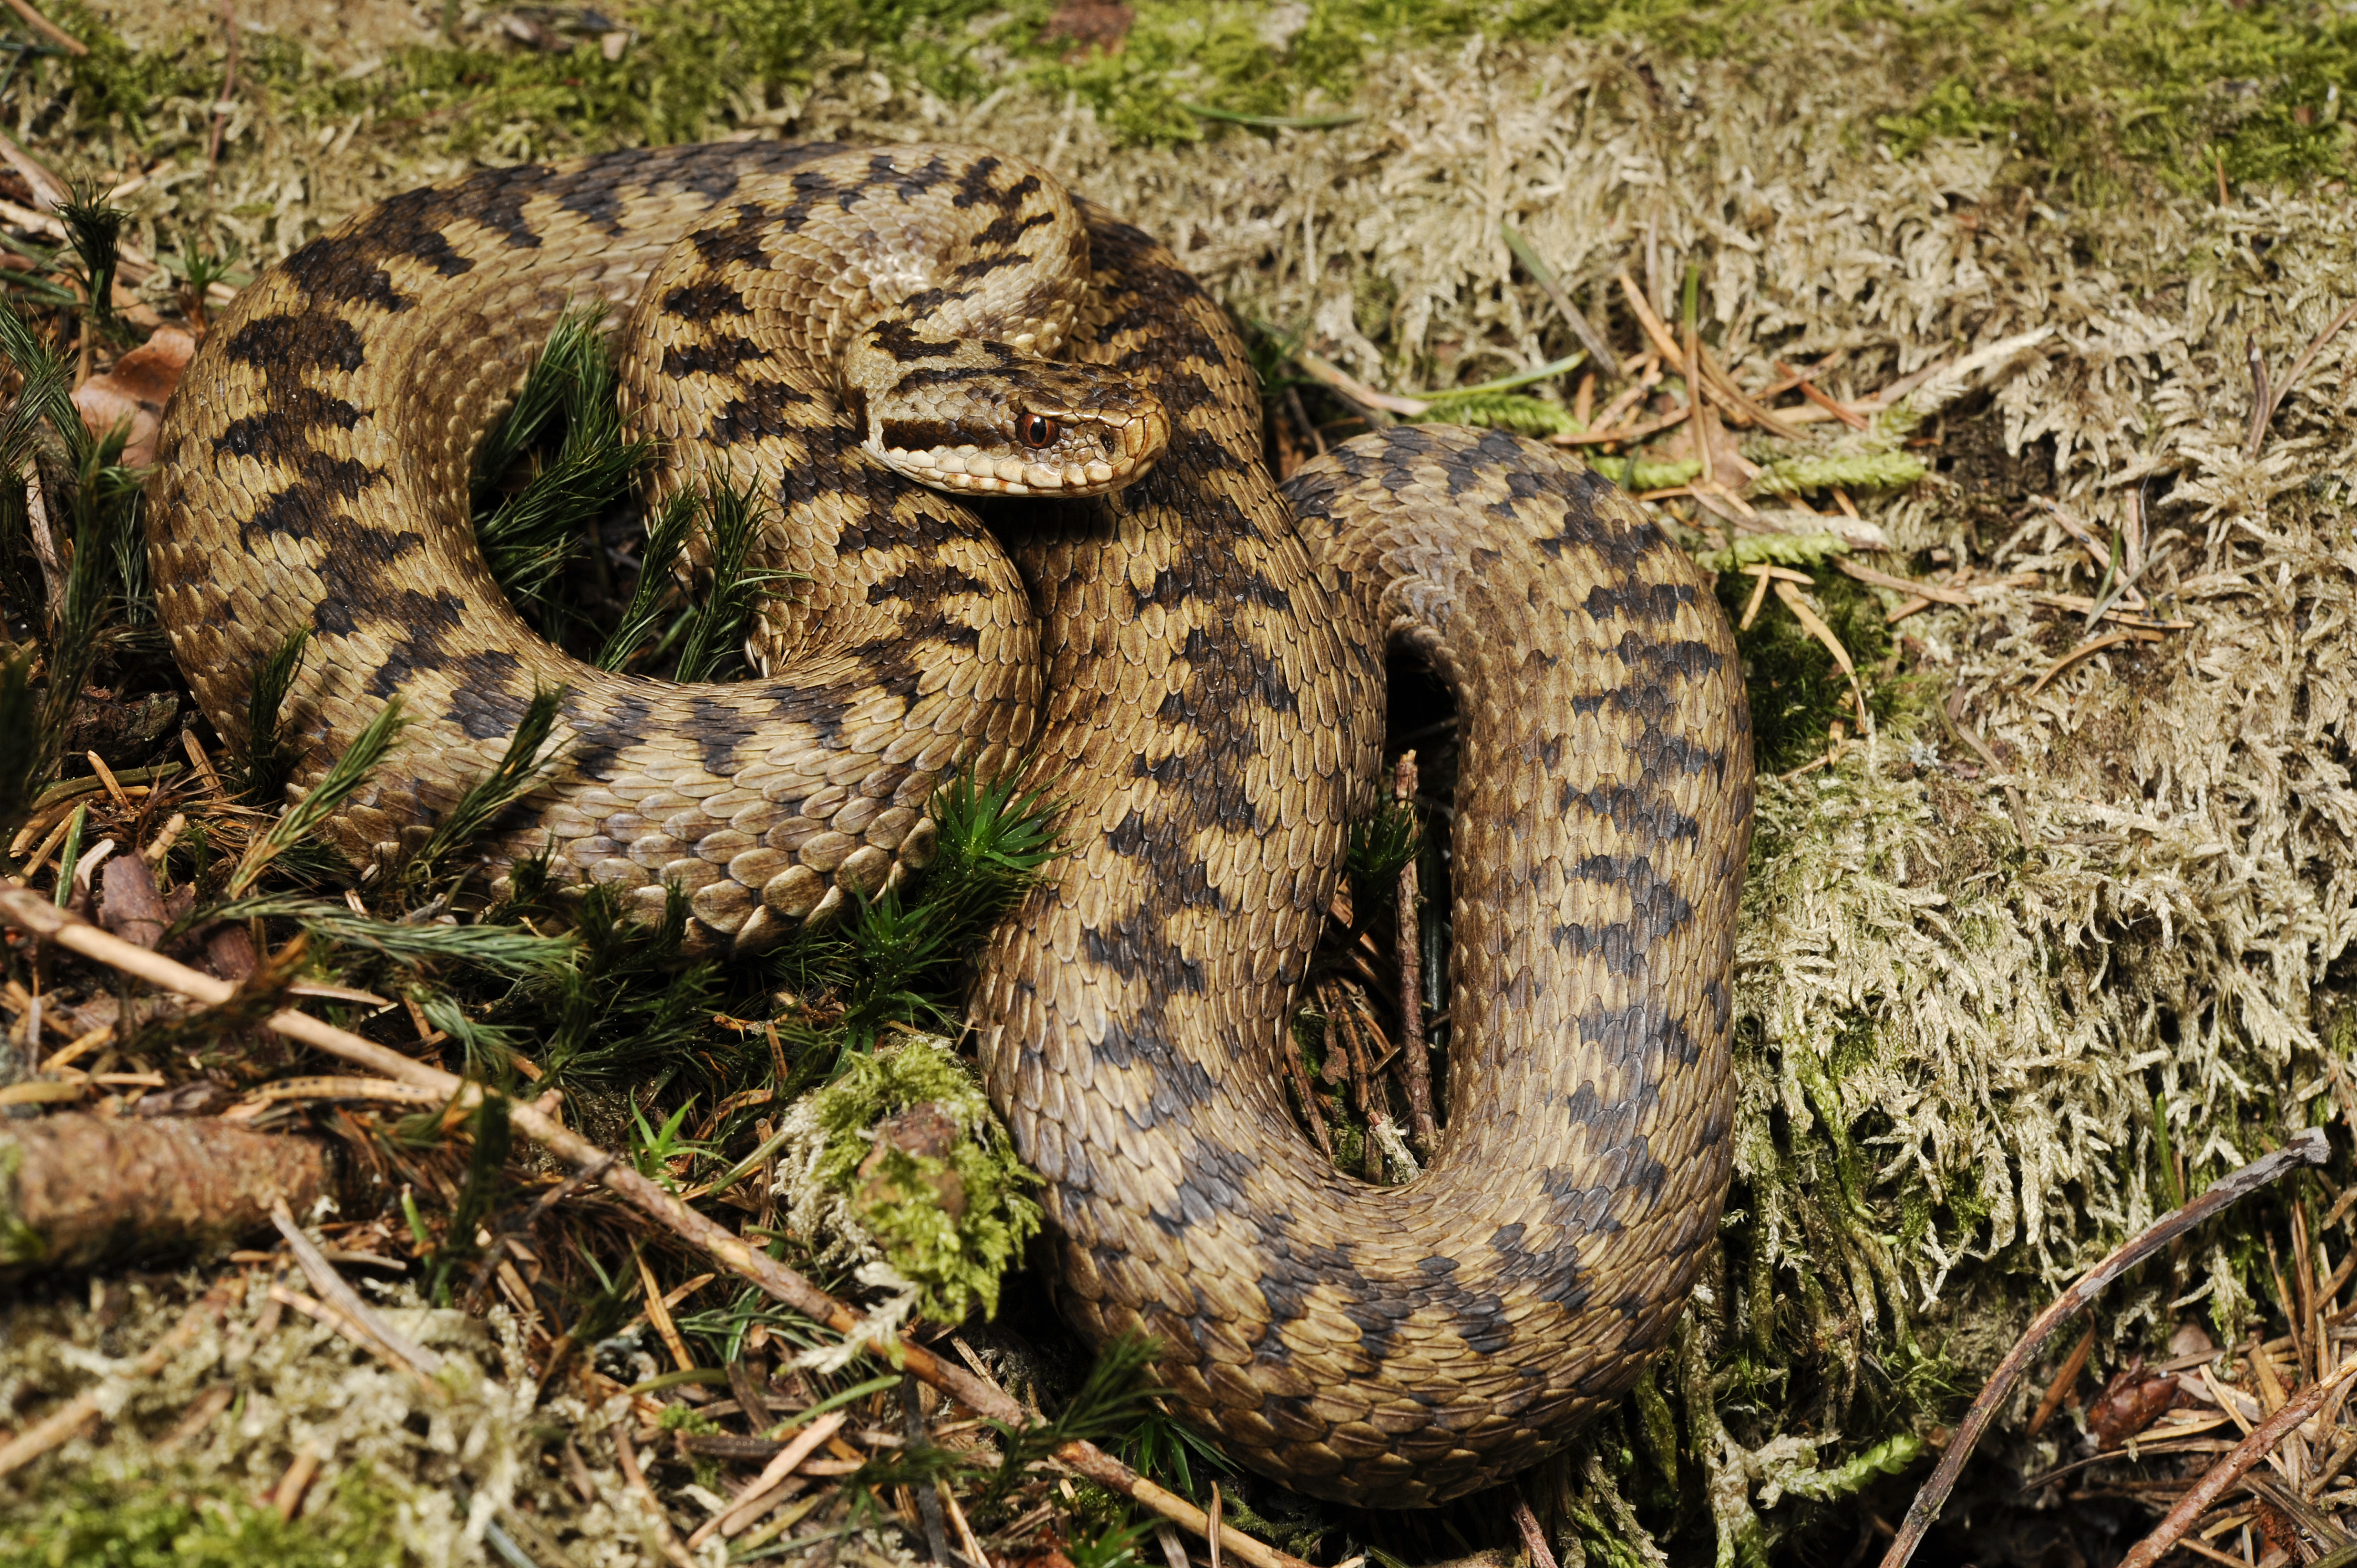 Are adders the only venomous snakes in England?